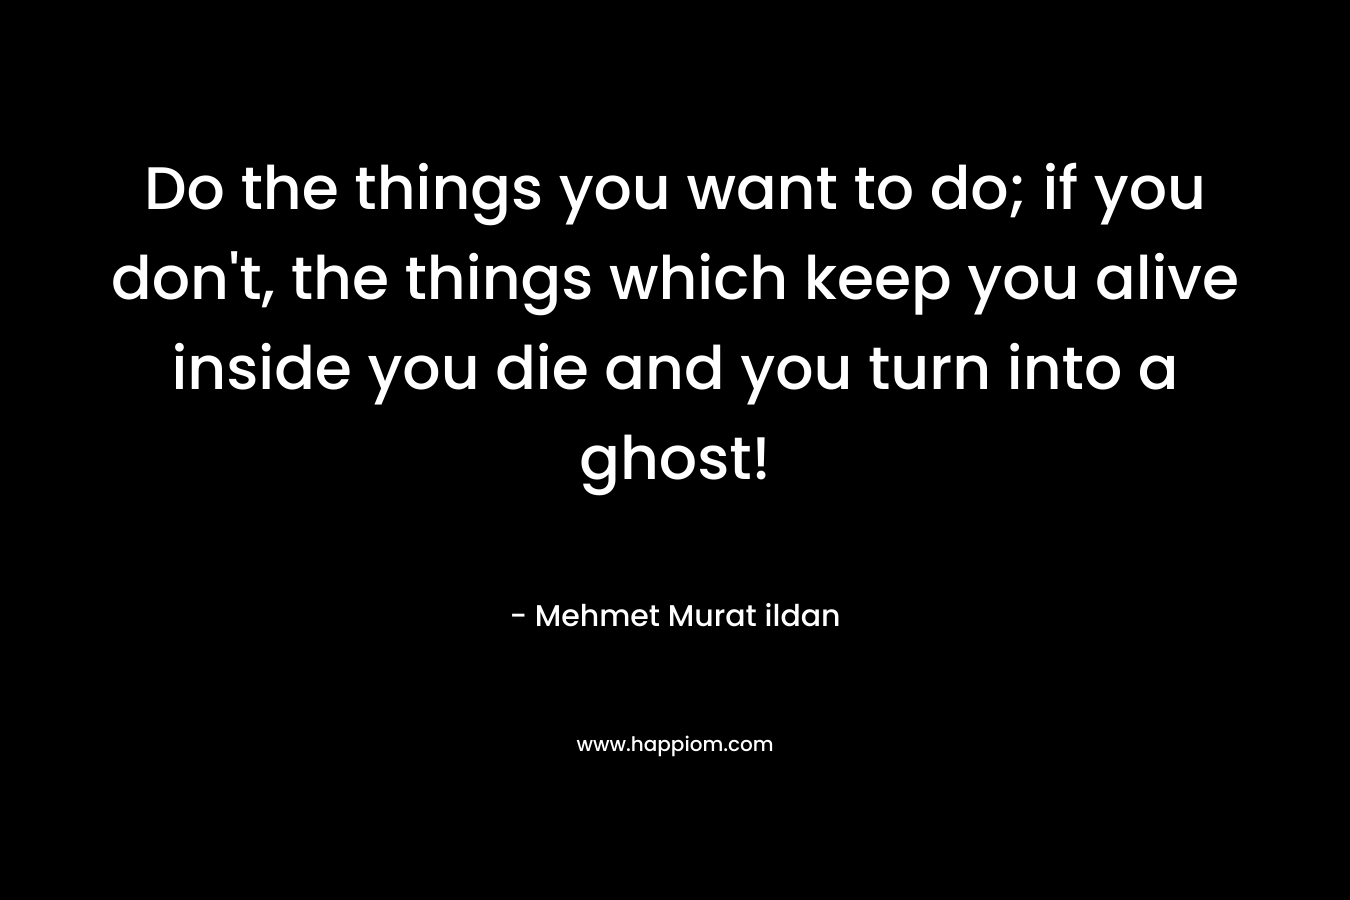 Do the things you want to do; if you don’t, the things which keep you alive inside you die and you turn into a ghost! – Mehmet Murat ildan